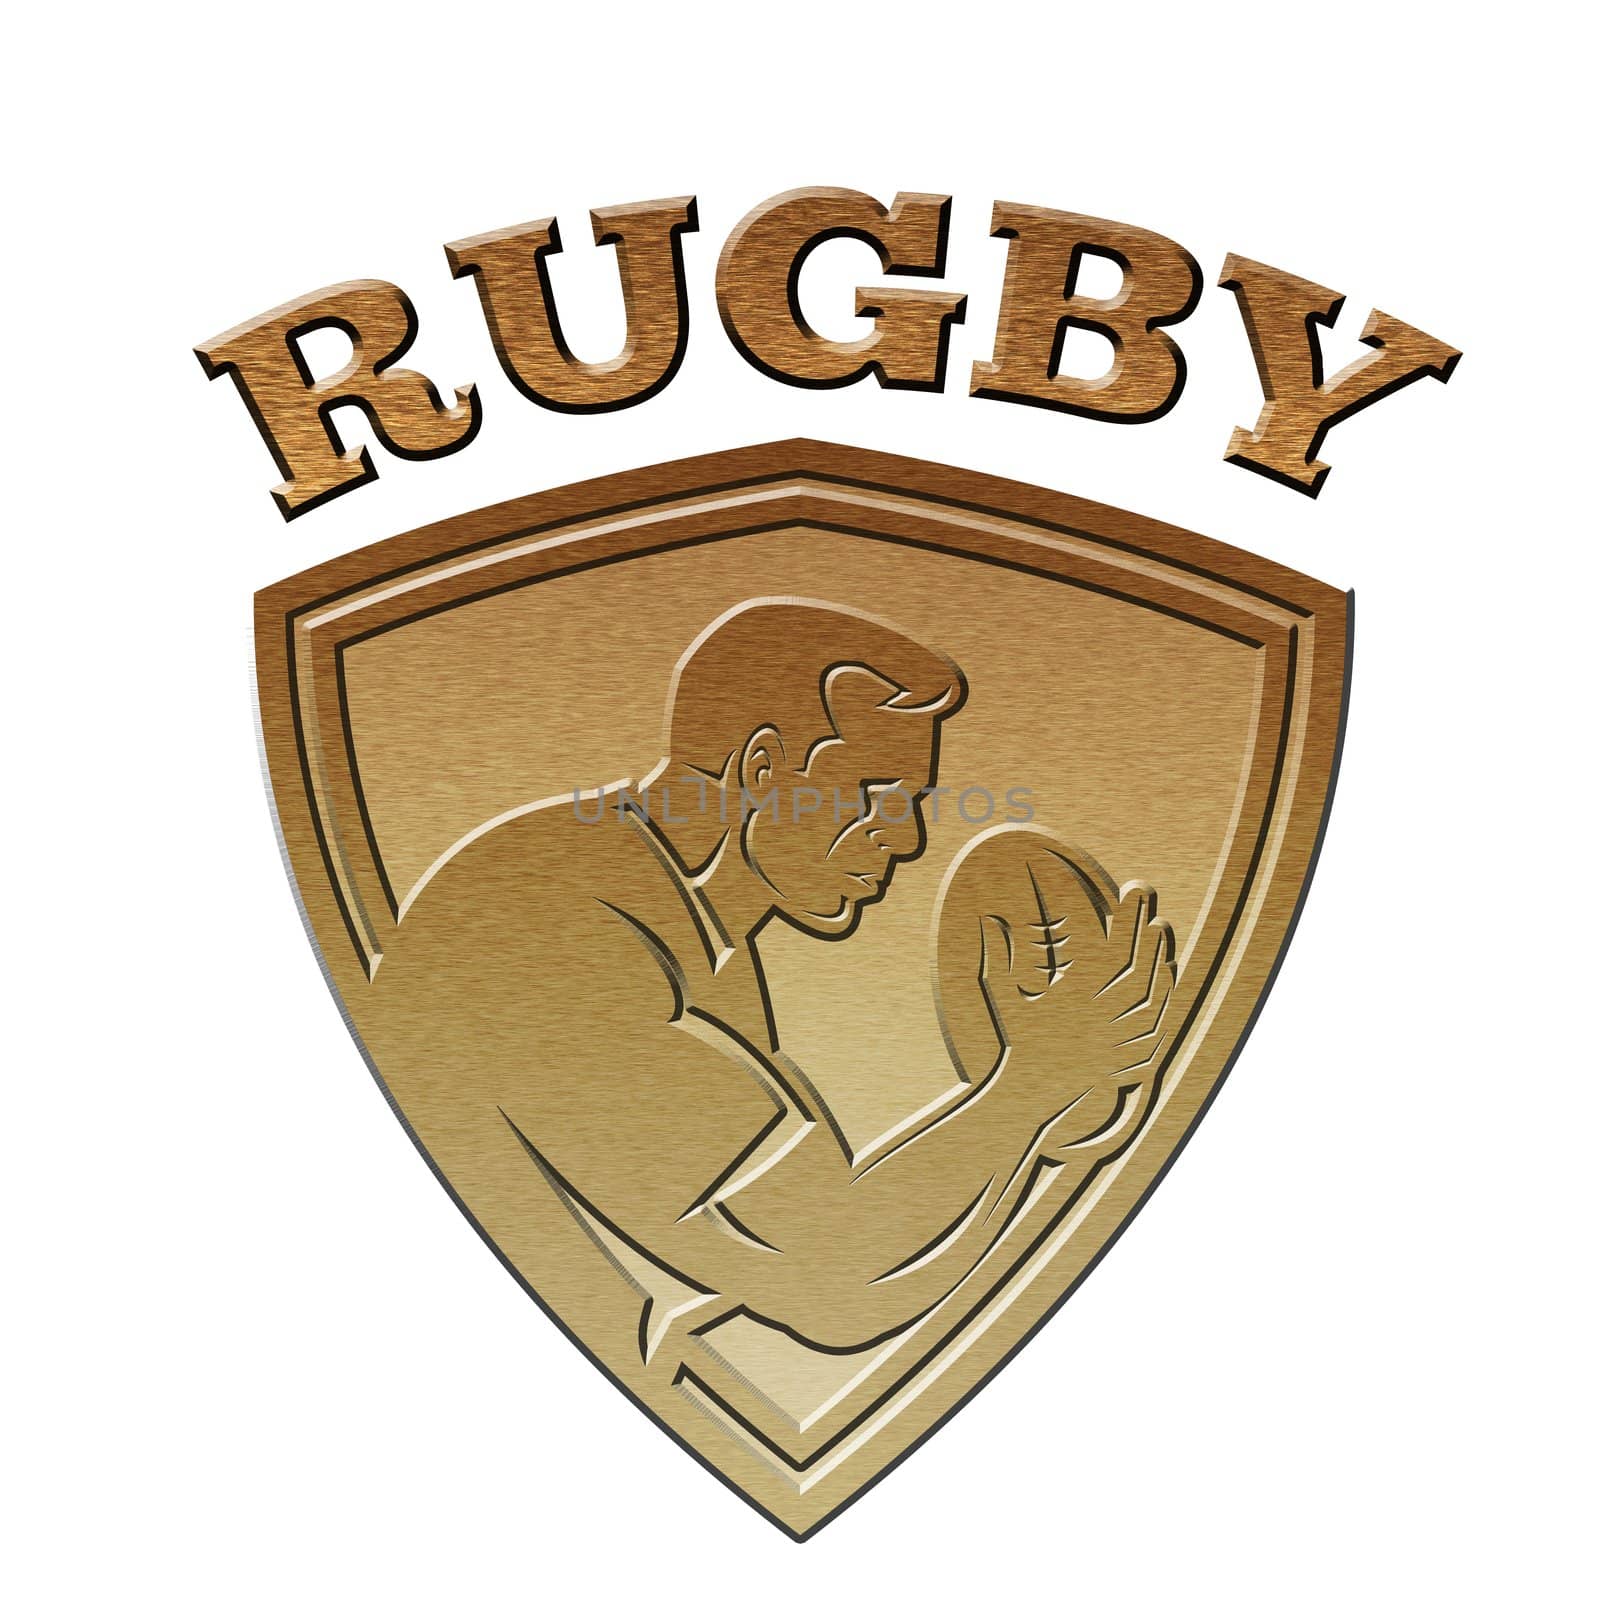 illustration of a rugby player running passing the ball on isolated background   done in metallic gold style set inside shield with words rugby